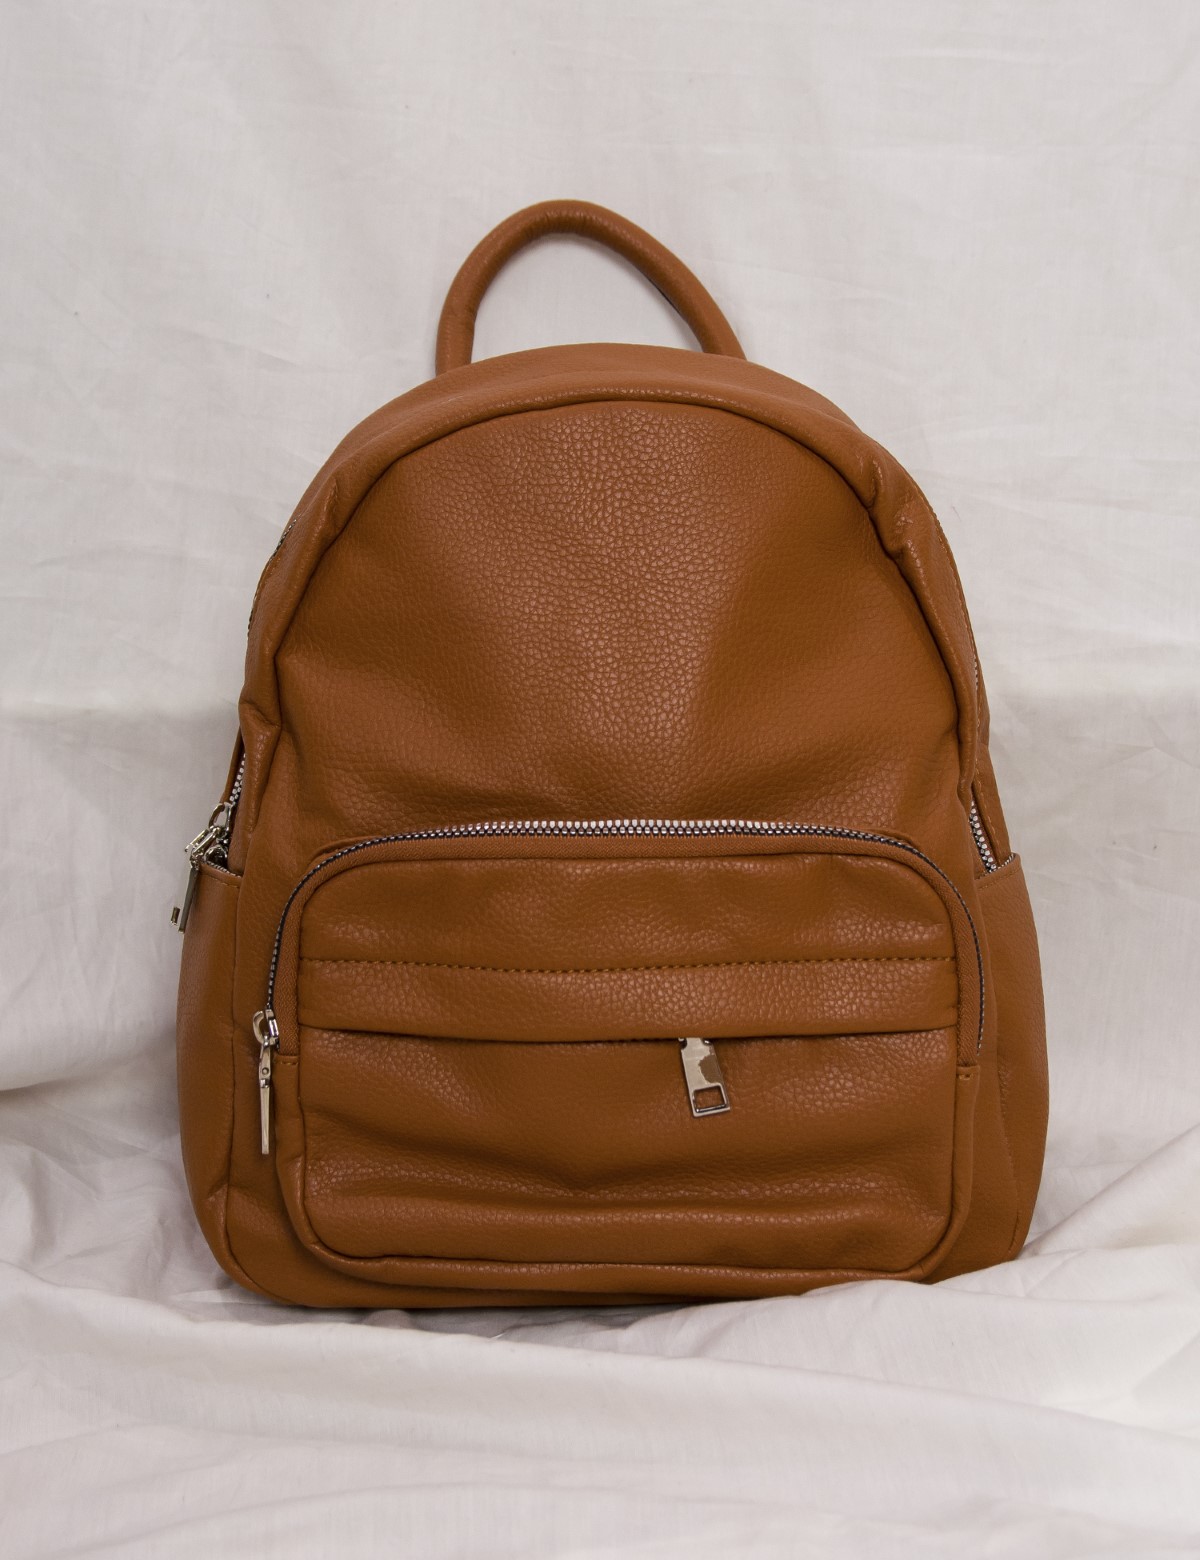 Huxley and Grace Γυναικειο ταμπα mini Backpack δερματινη CK5696T